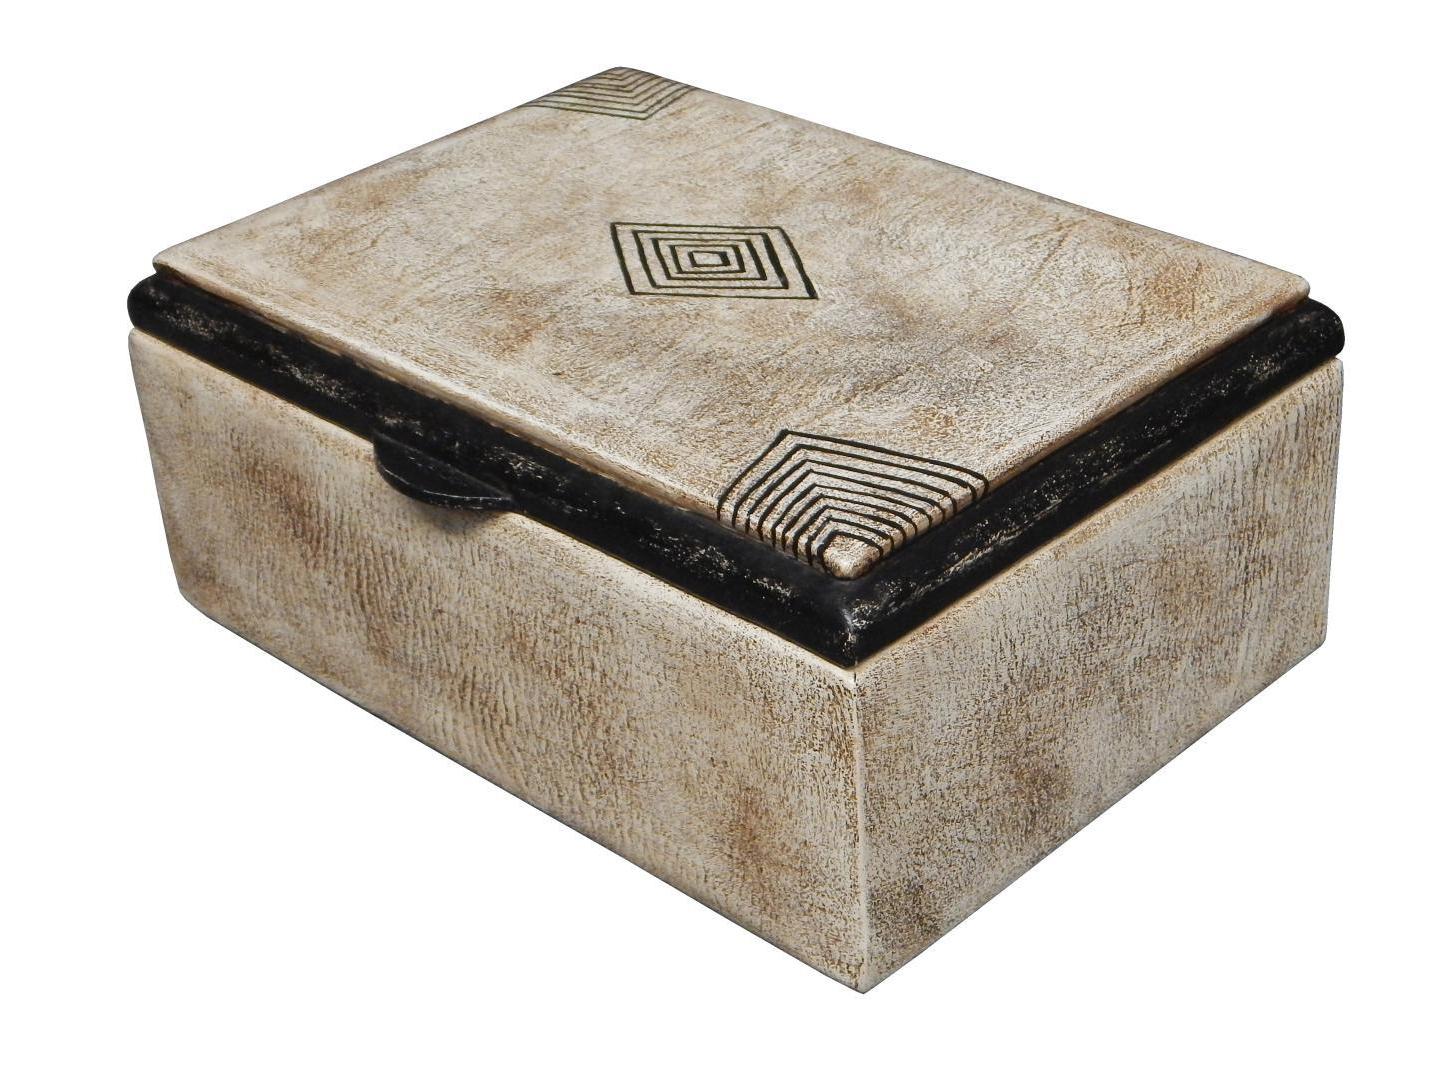 leather box  with a tribal shipibo desing on top of the box